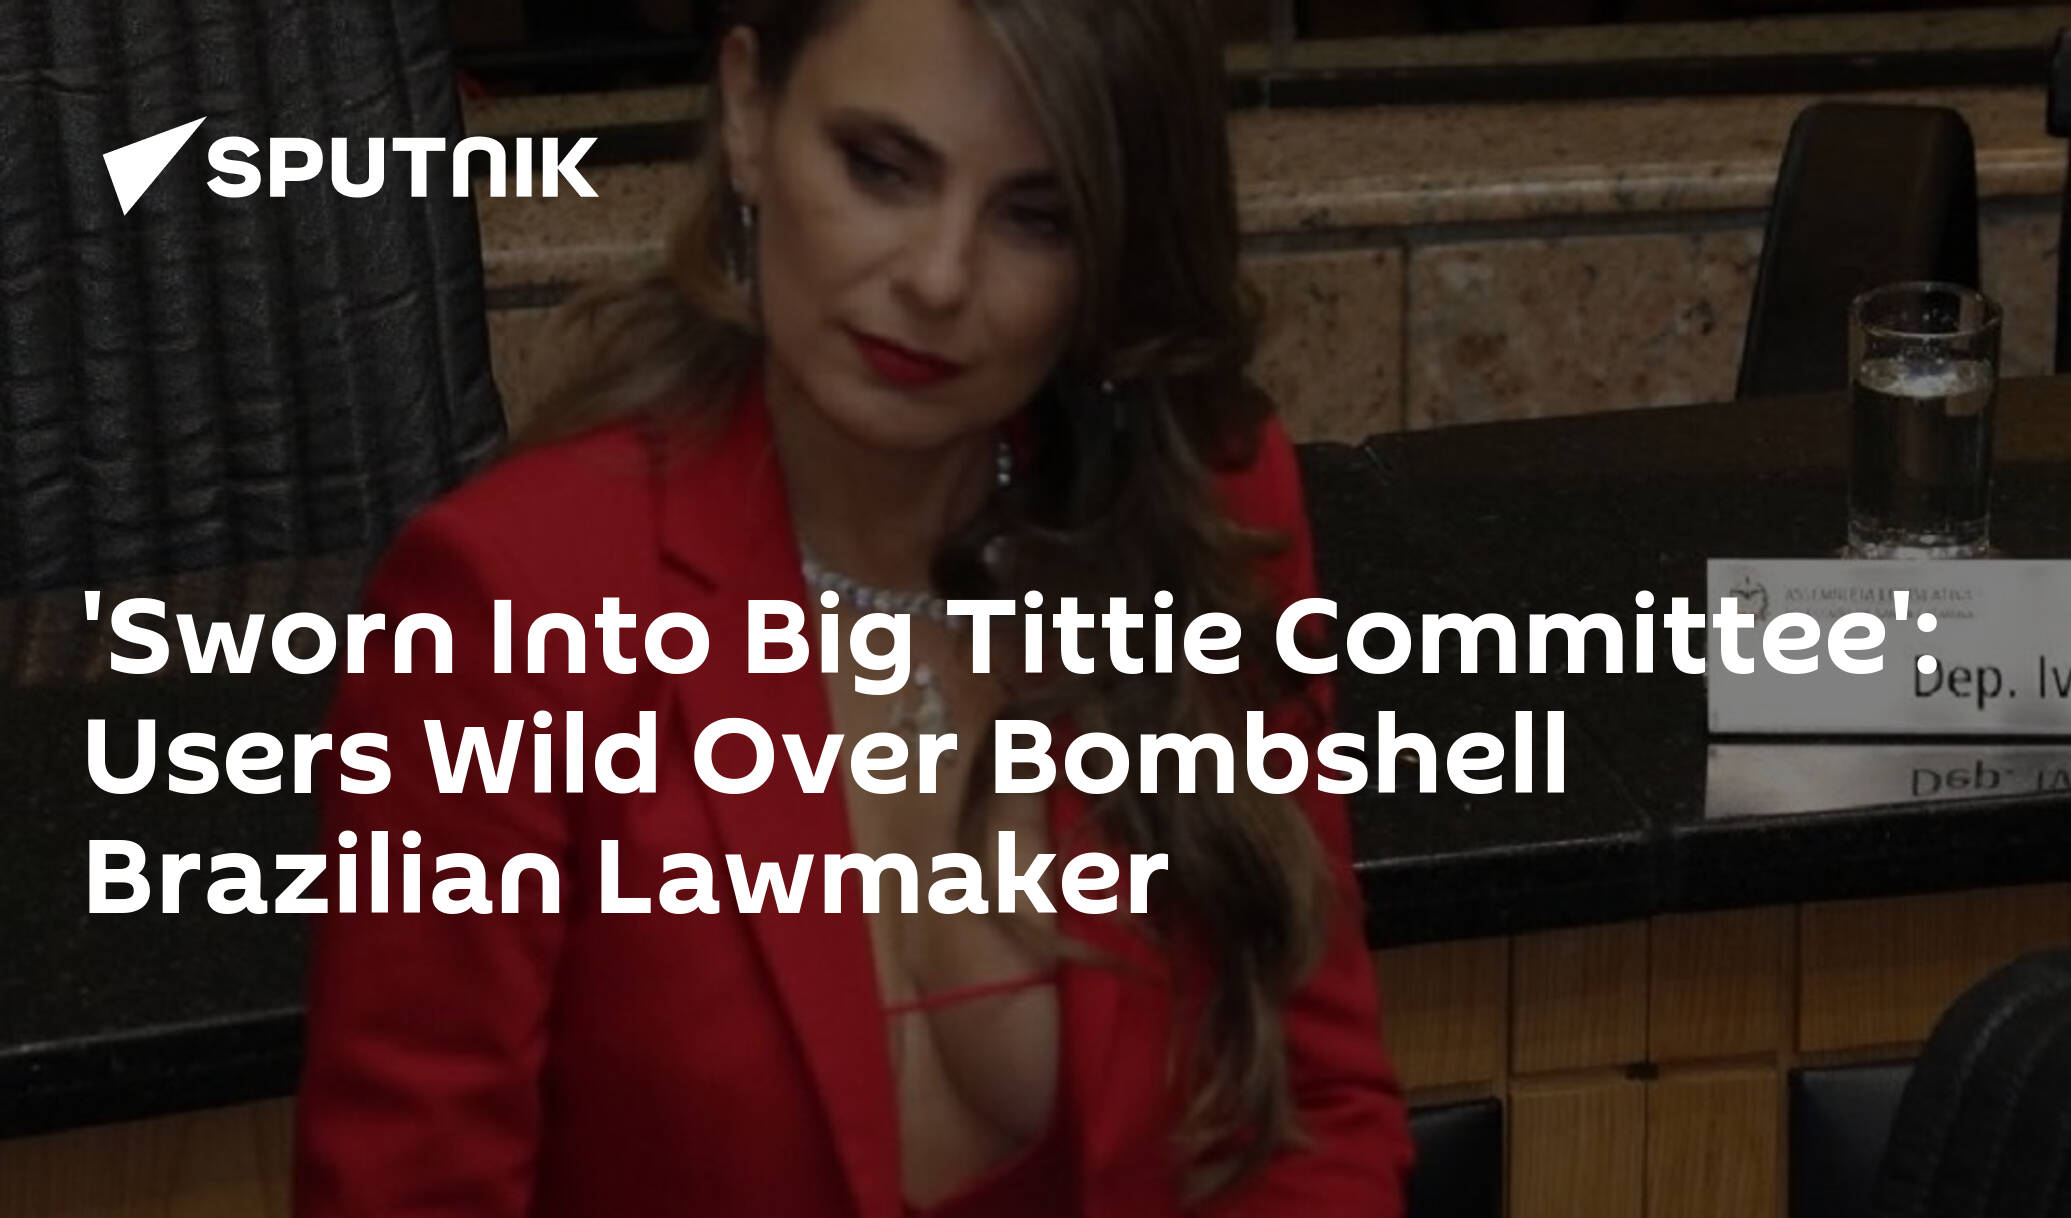 Lawmaker showing deep cleavage stirs controversy in Brazil